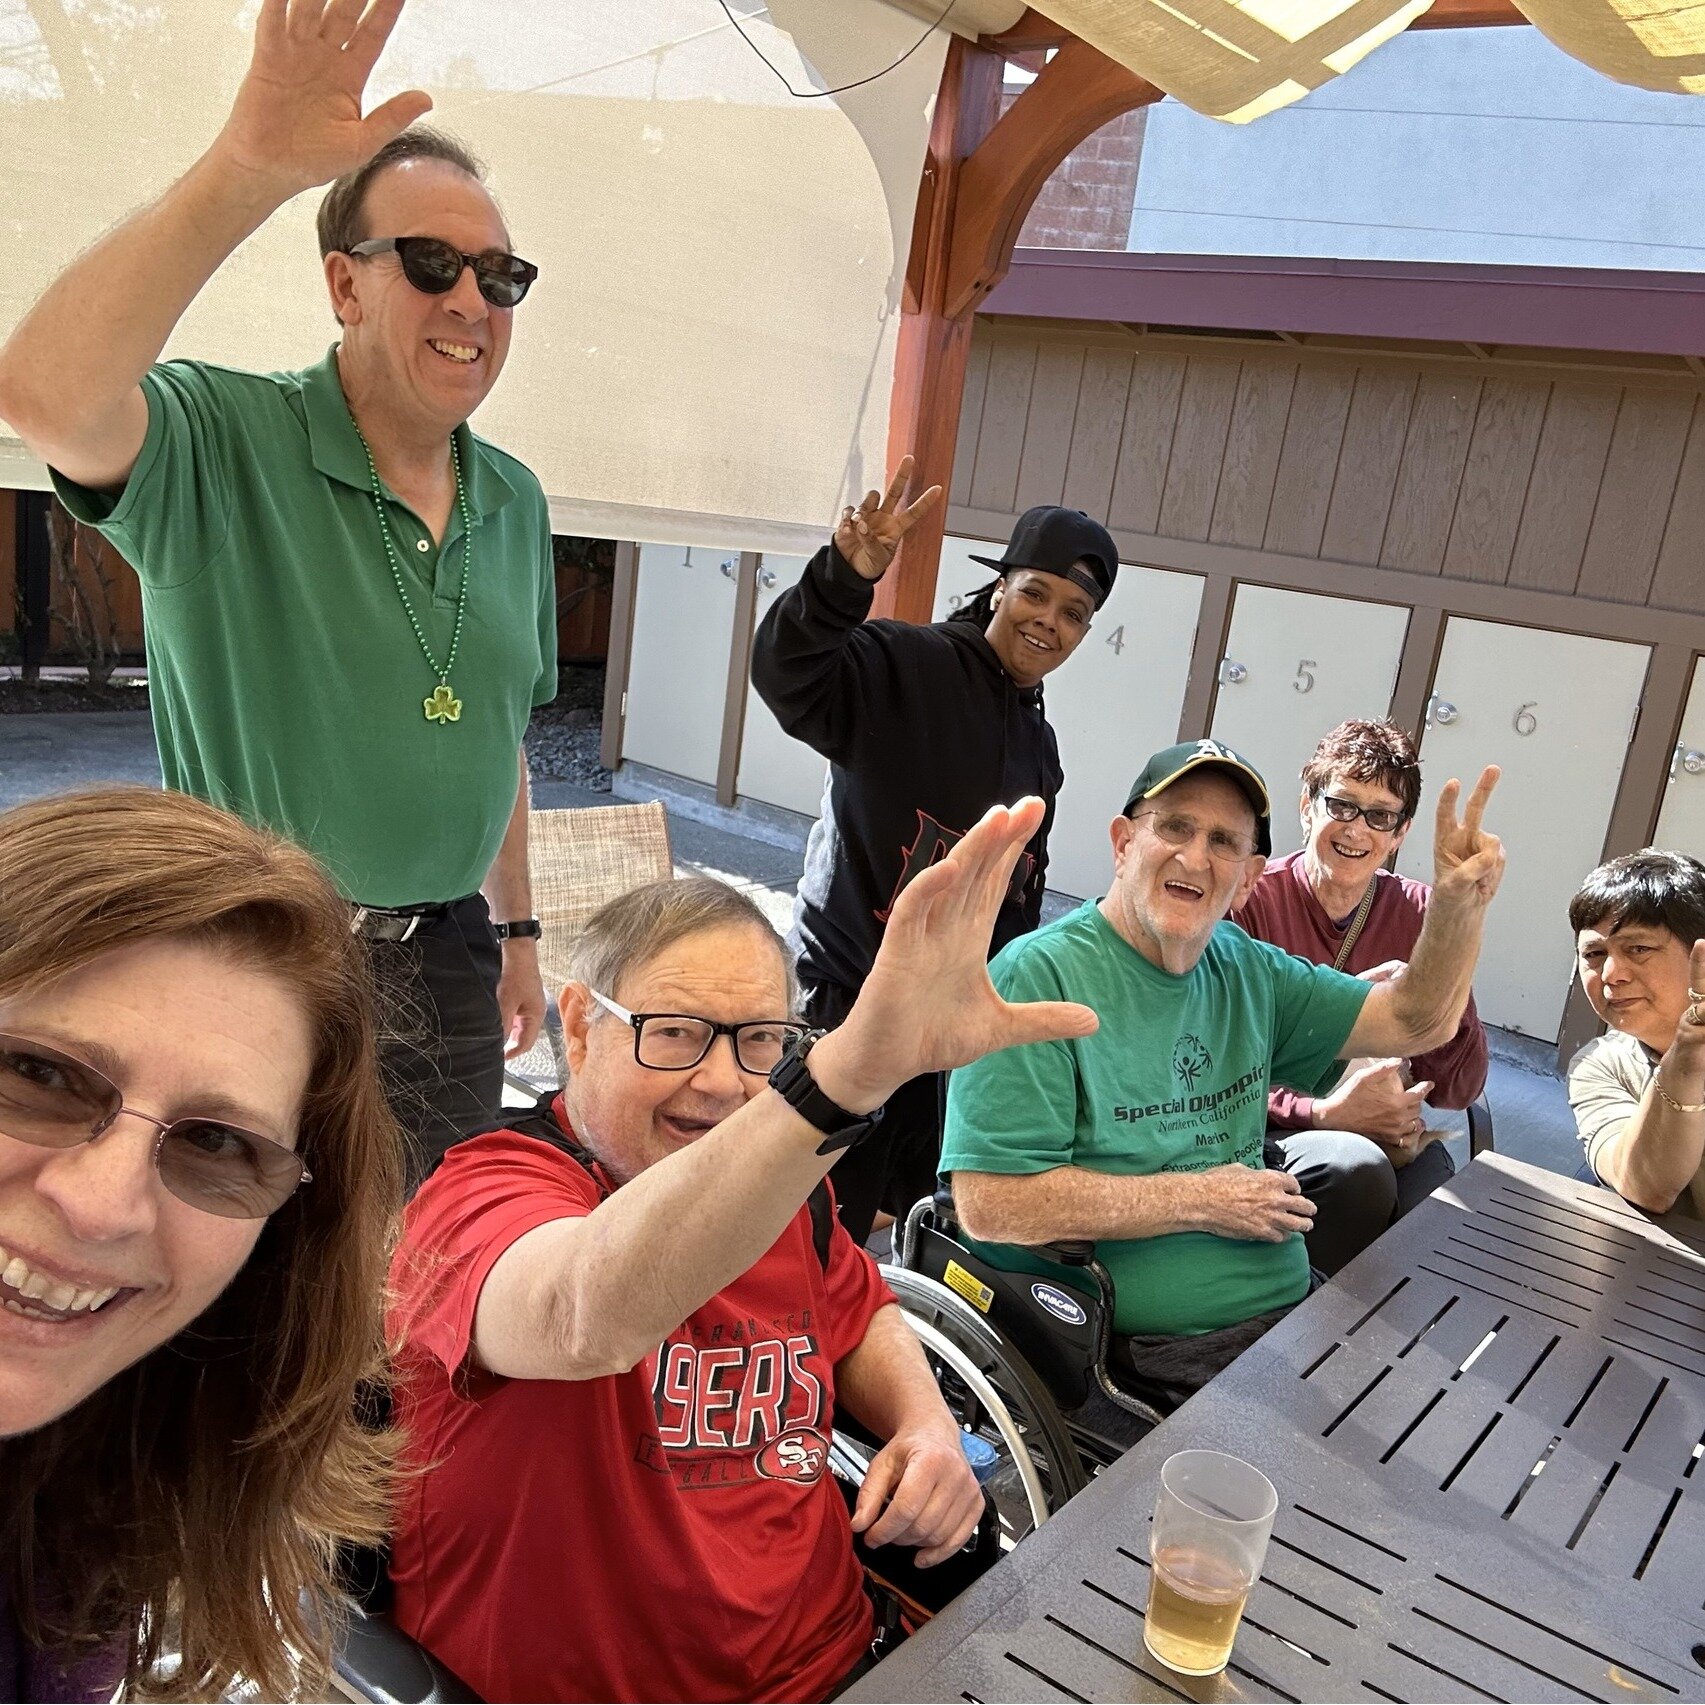 The crew at Del Ganado are like family. Harold arrived home from some rehabilitation therapy and a celebration was in order. This group helps one another lead full lives. Yay for chosen families! 

#excellentservice #bestnonprofit #marinnonprofit #li